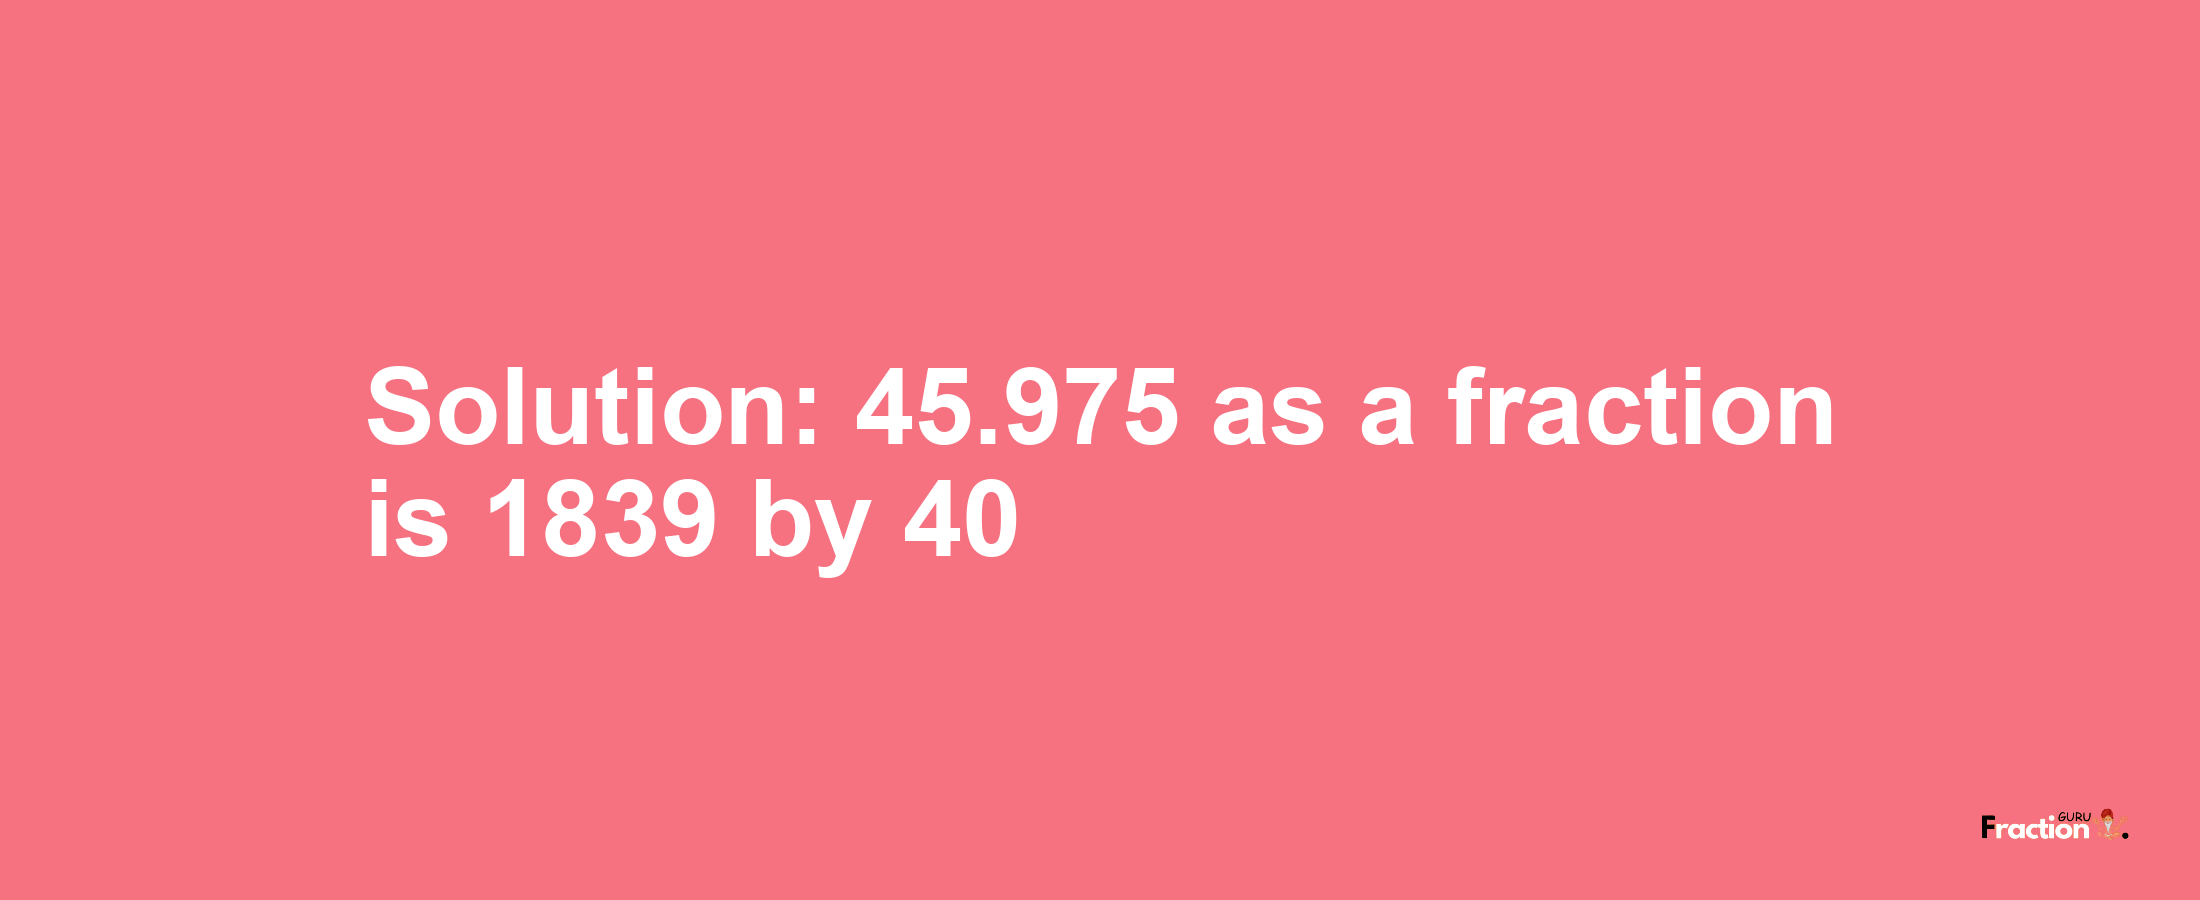 Solution:45.975 as a fraction is 1839/40